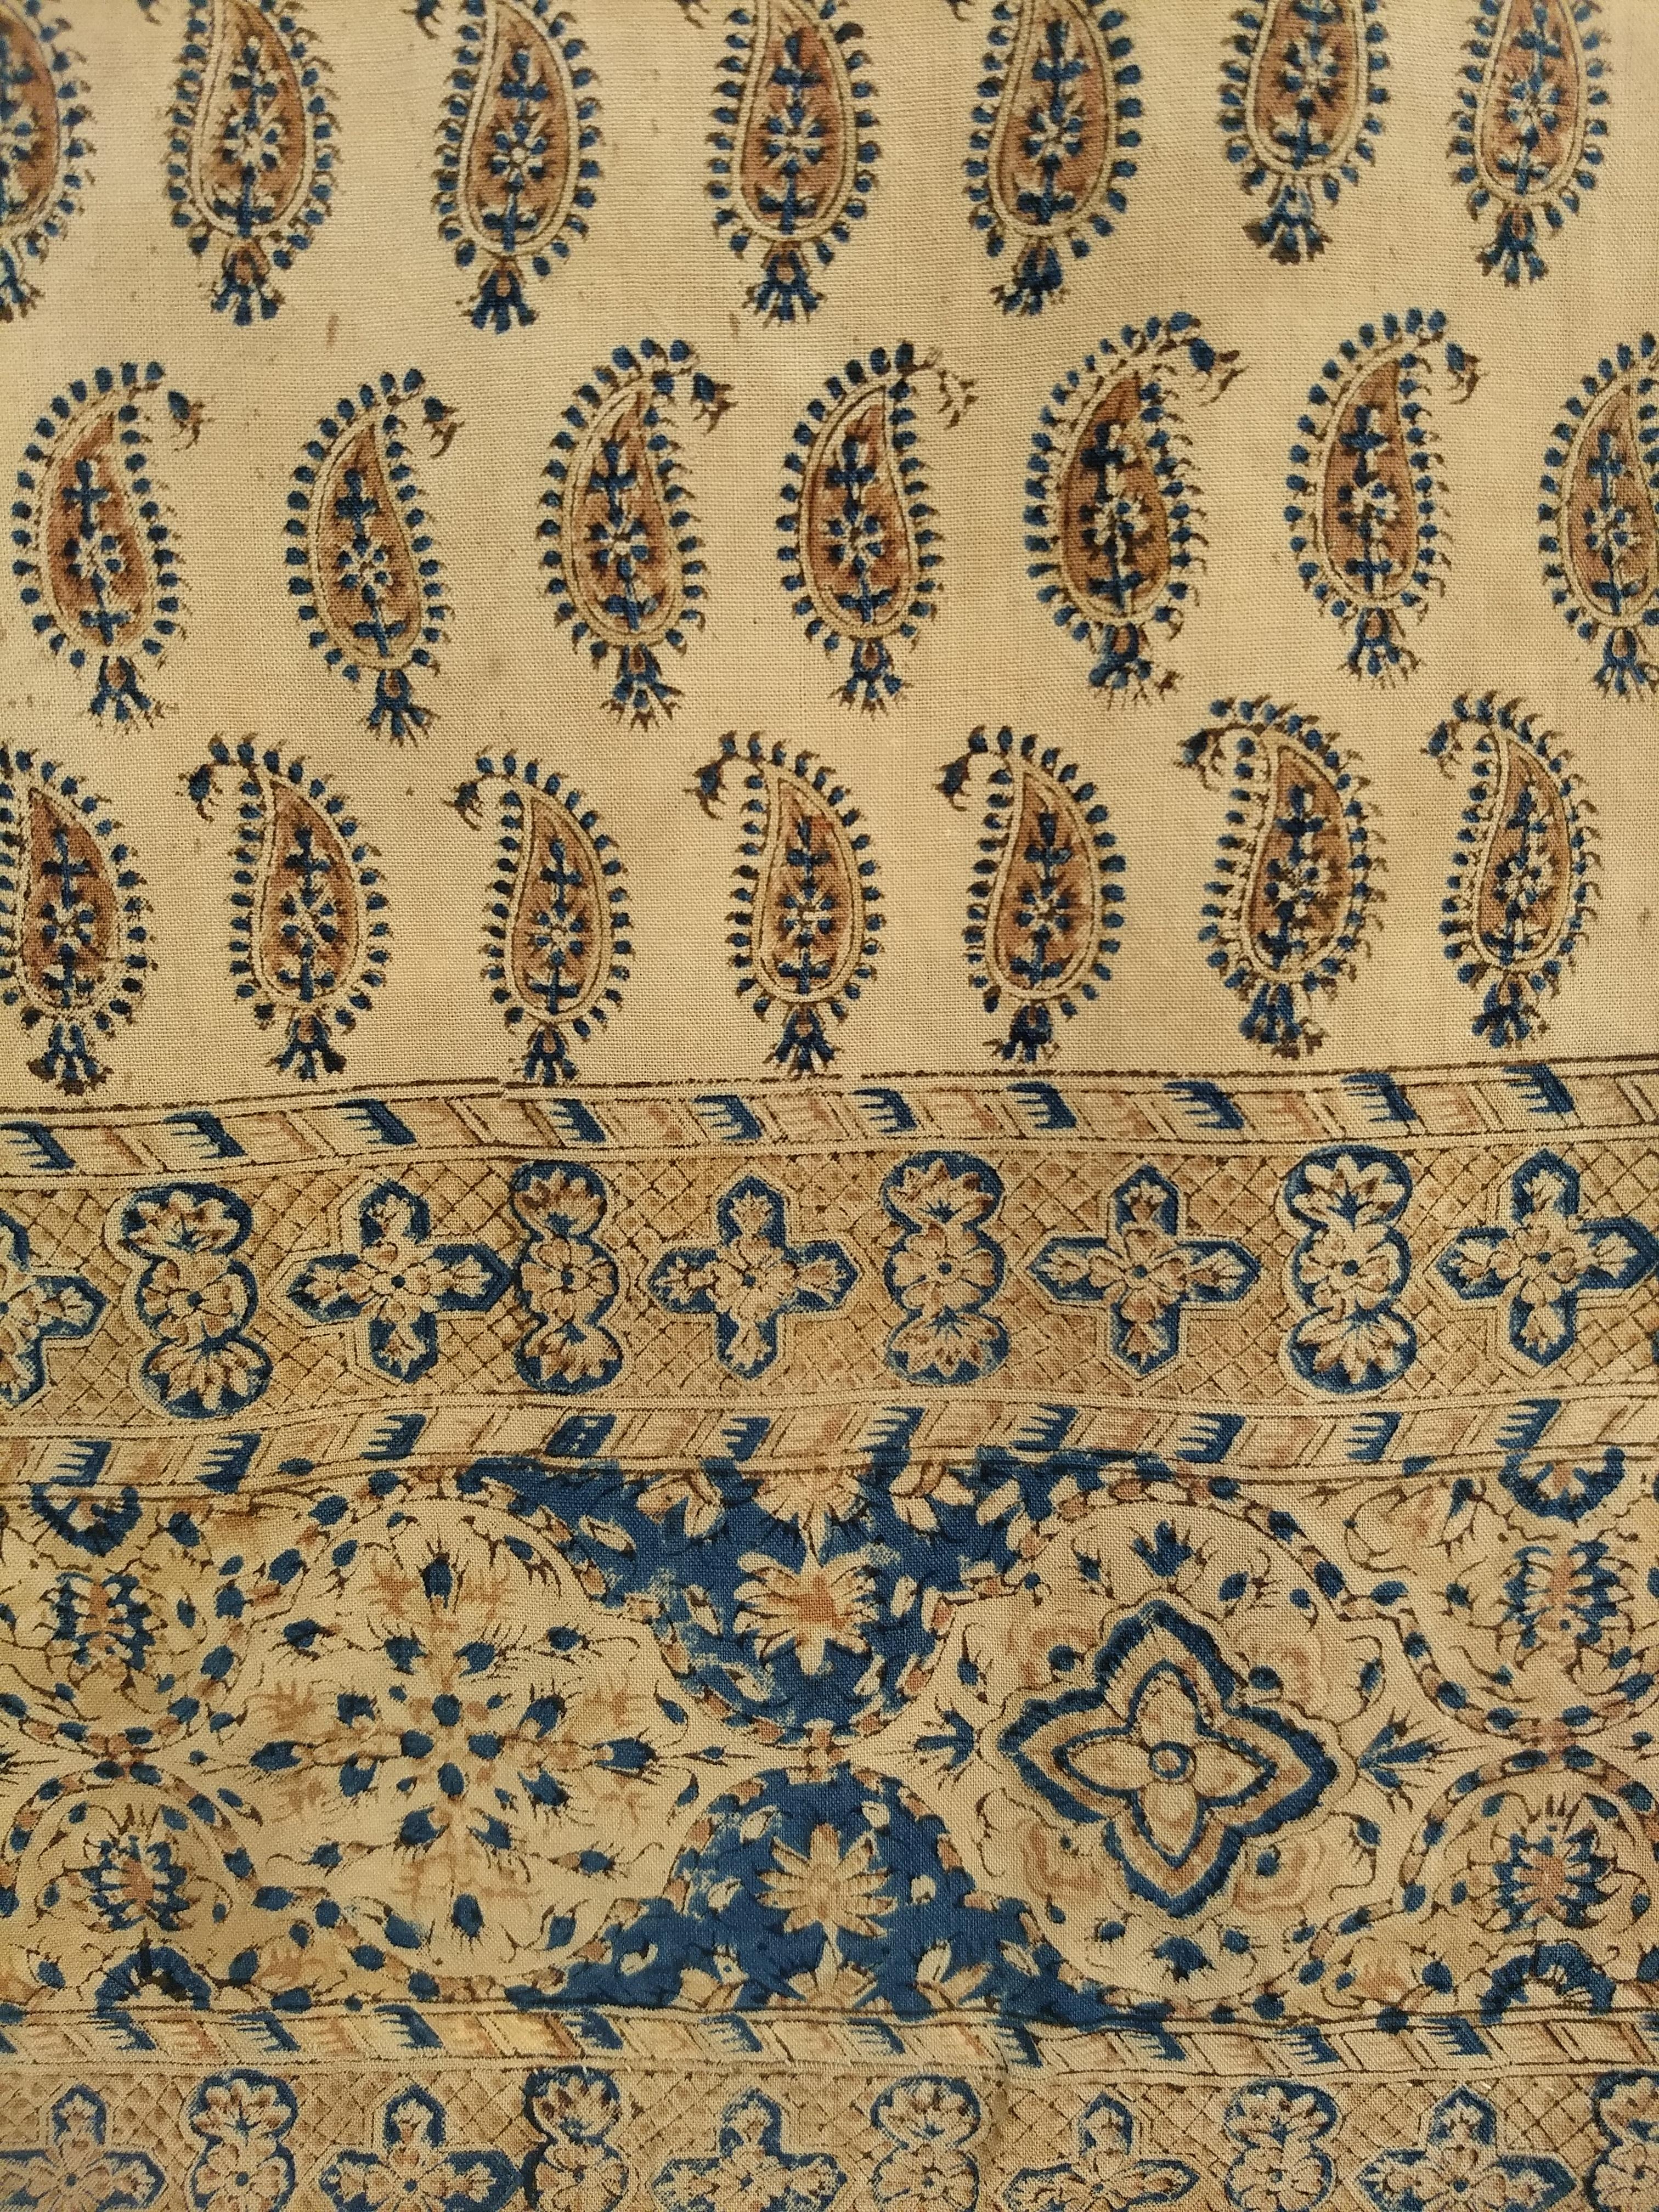 Cotton Vintage Persian Hand-Crafted Kalamkar Block Print Textile with a Paisley Pattern